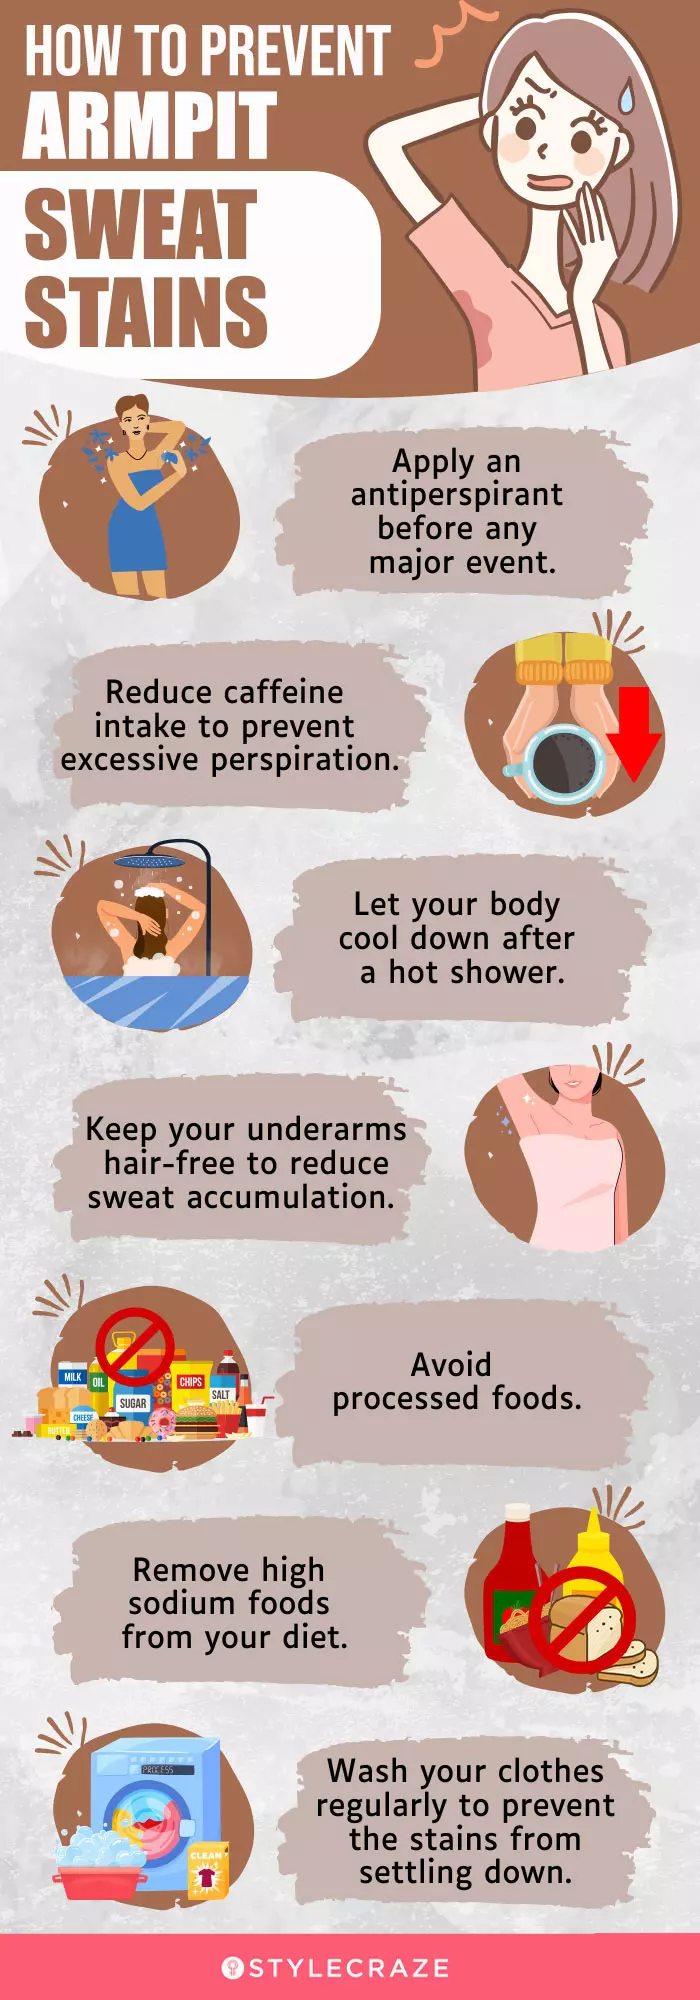 How To Prevent Armpit Sweat Stains (infographic)